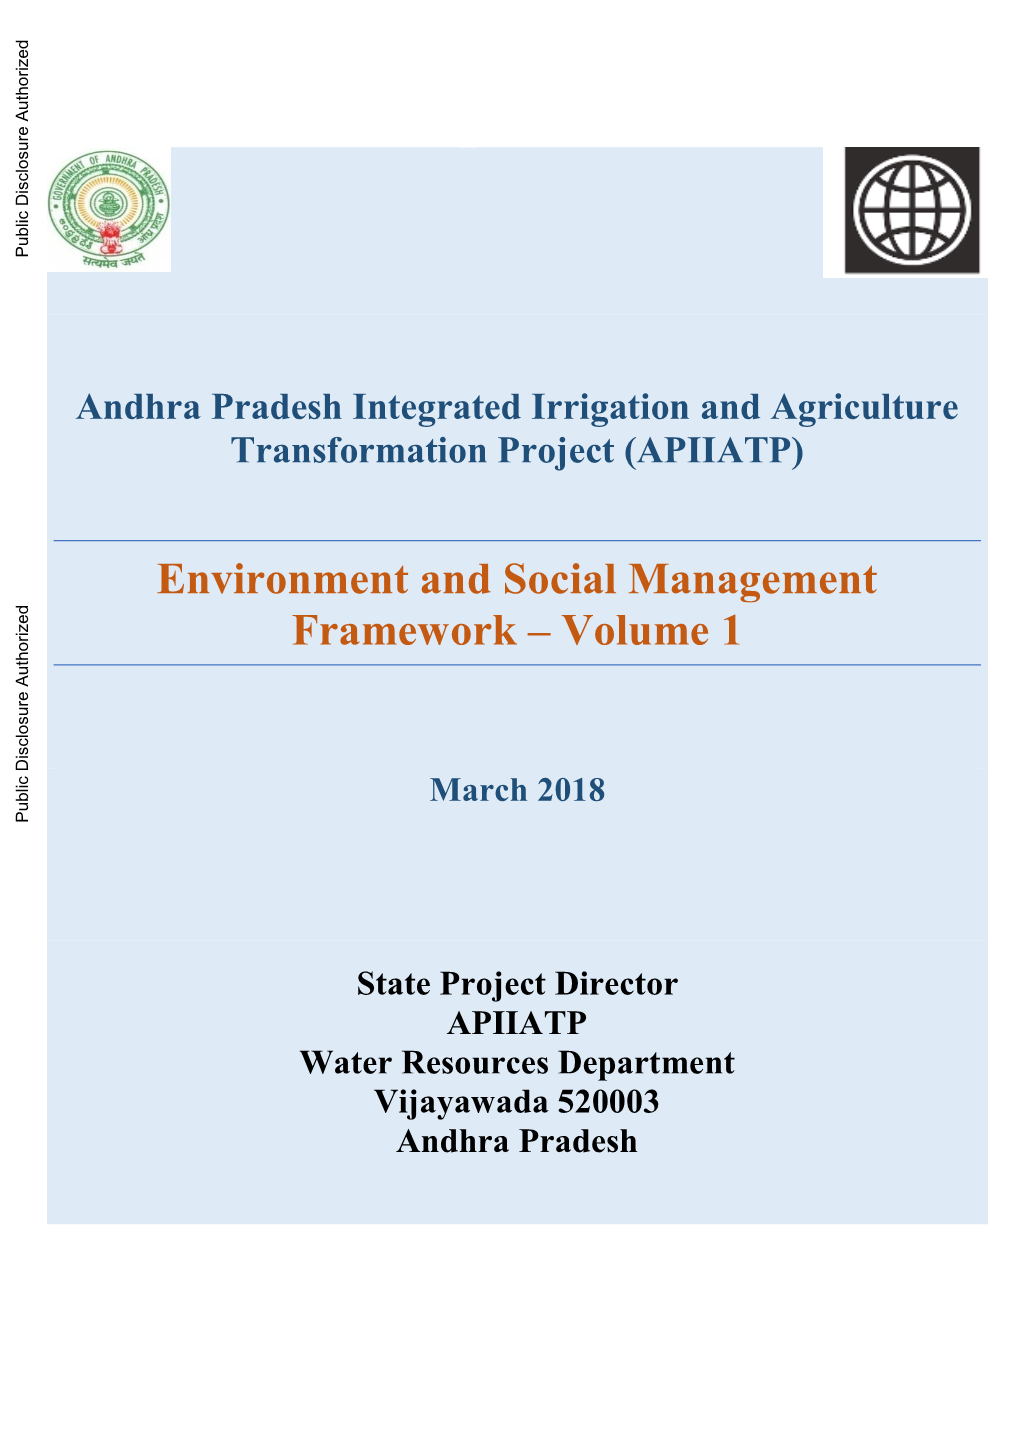 Andhra Pradesh Integrated Irrigation and Agriculture Transformation Project (APIIATP) Public Disclosure Authorized Environment and Social Management